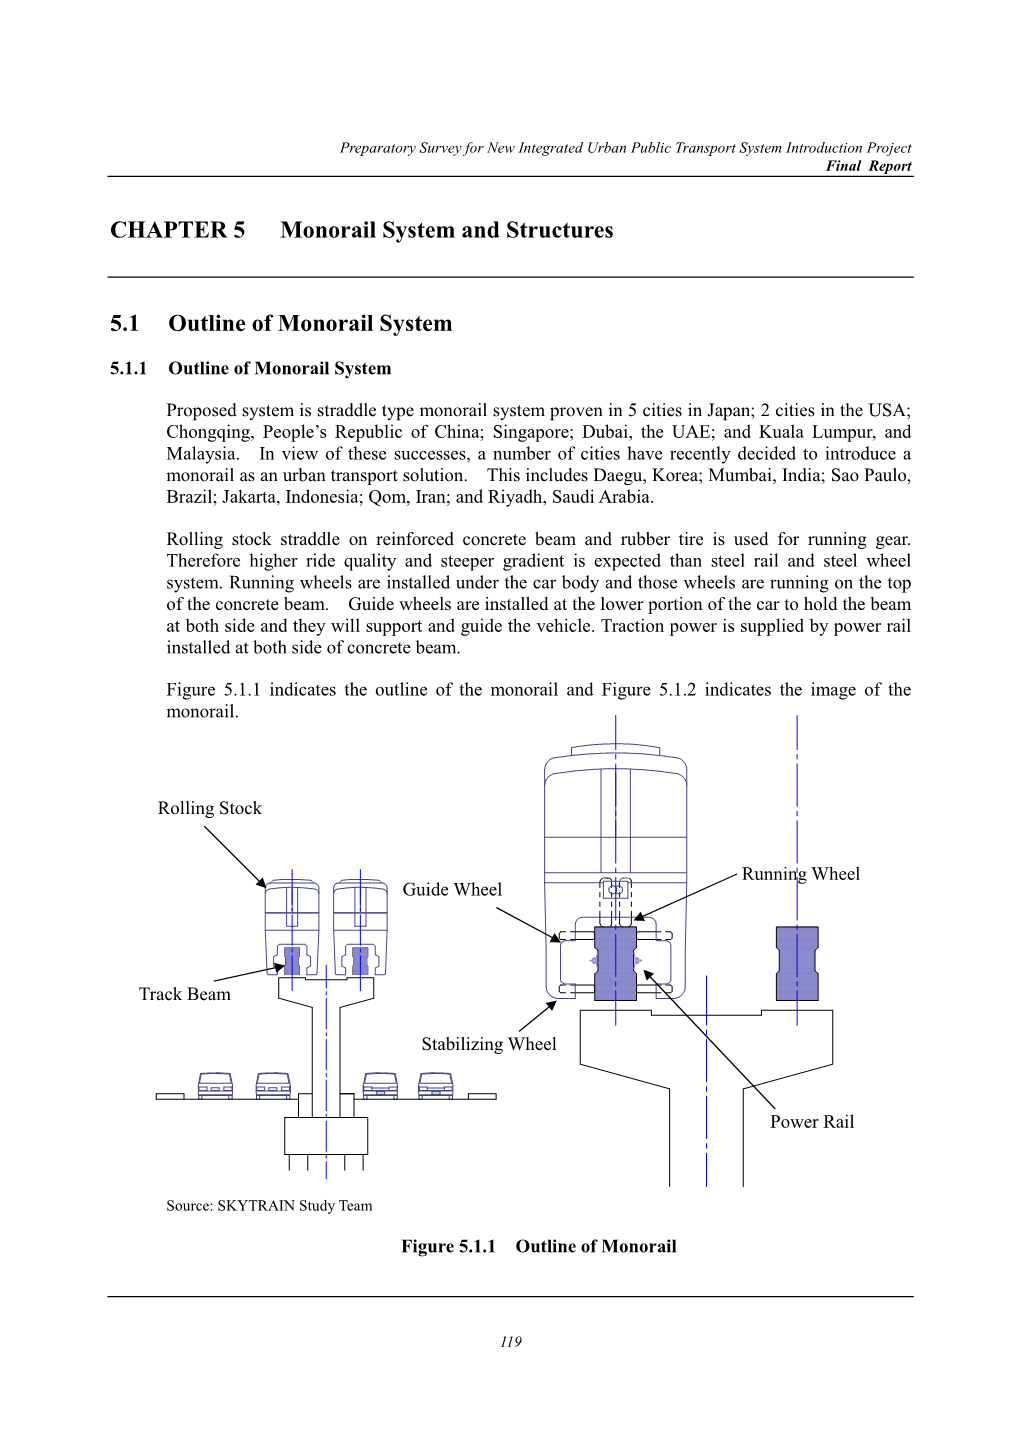 CHAPTER 5 Monorail System and Structures 5.1 Outline of Monorail